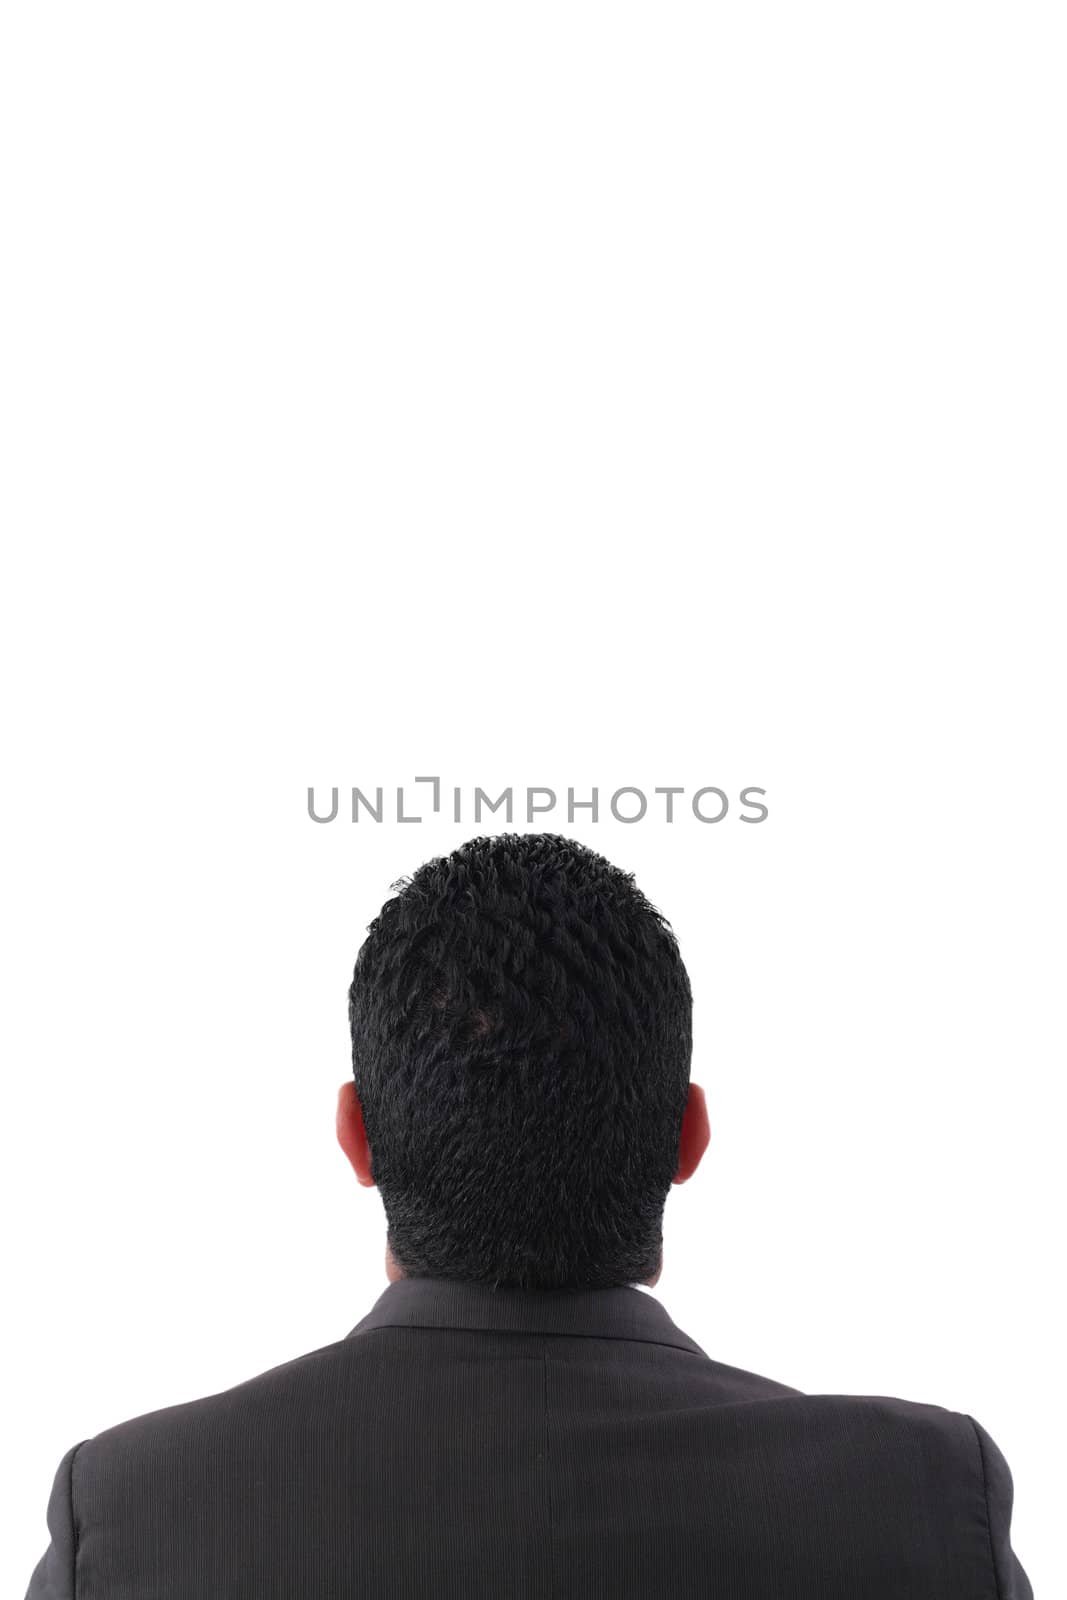 back of pensive businessman looking up isolated on white background